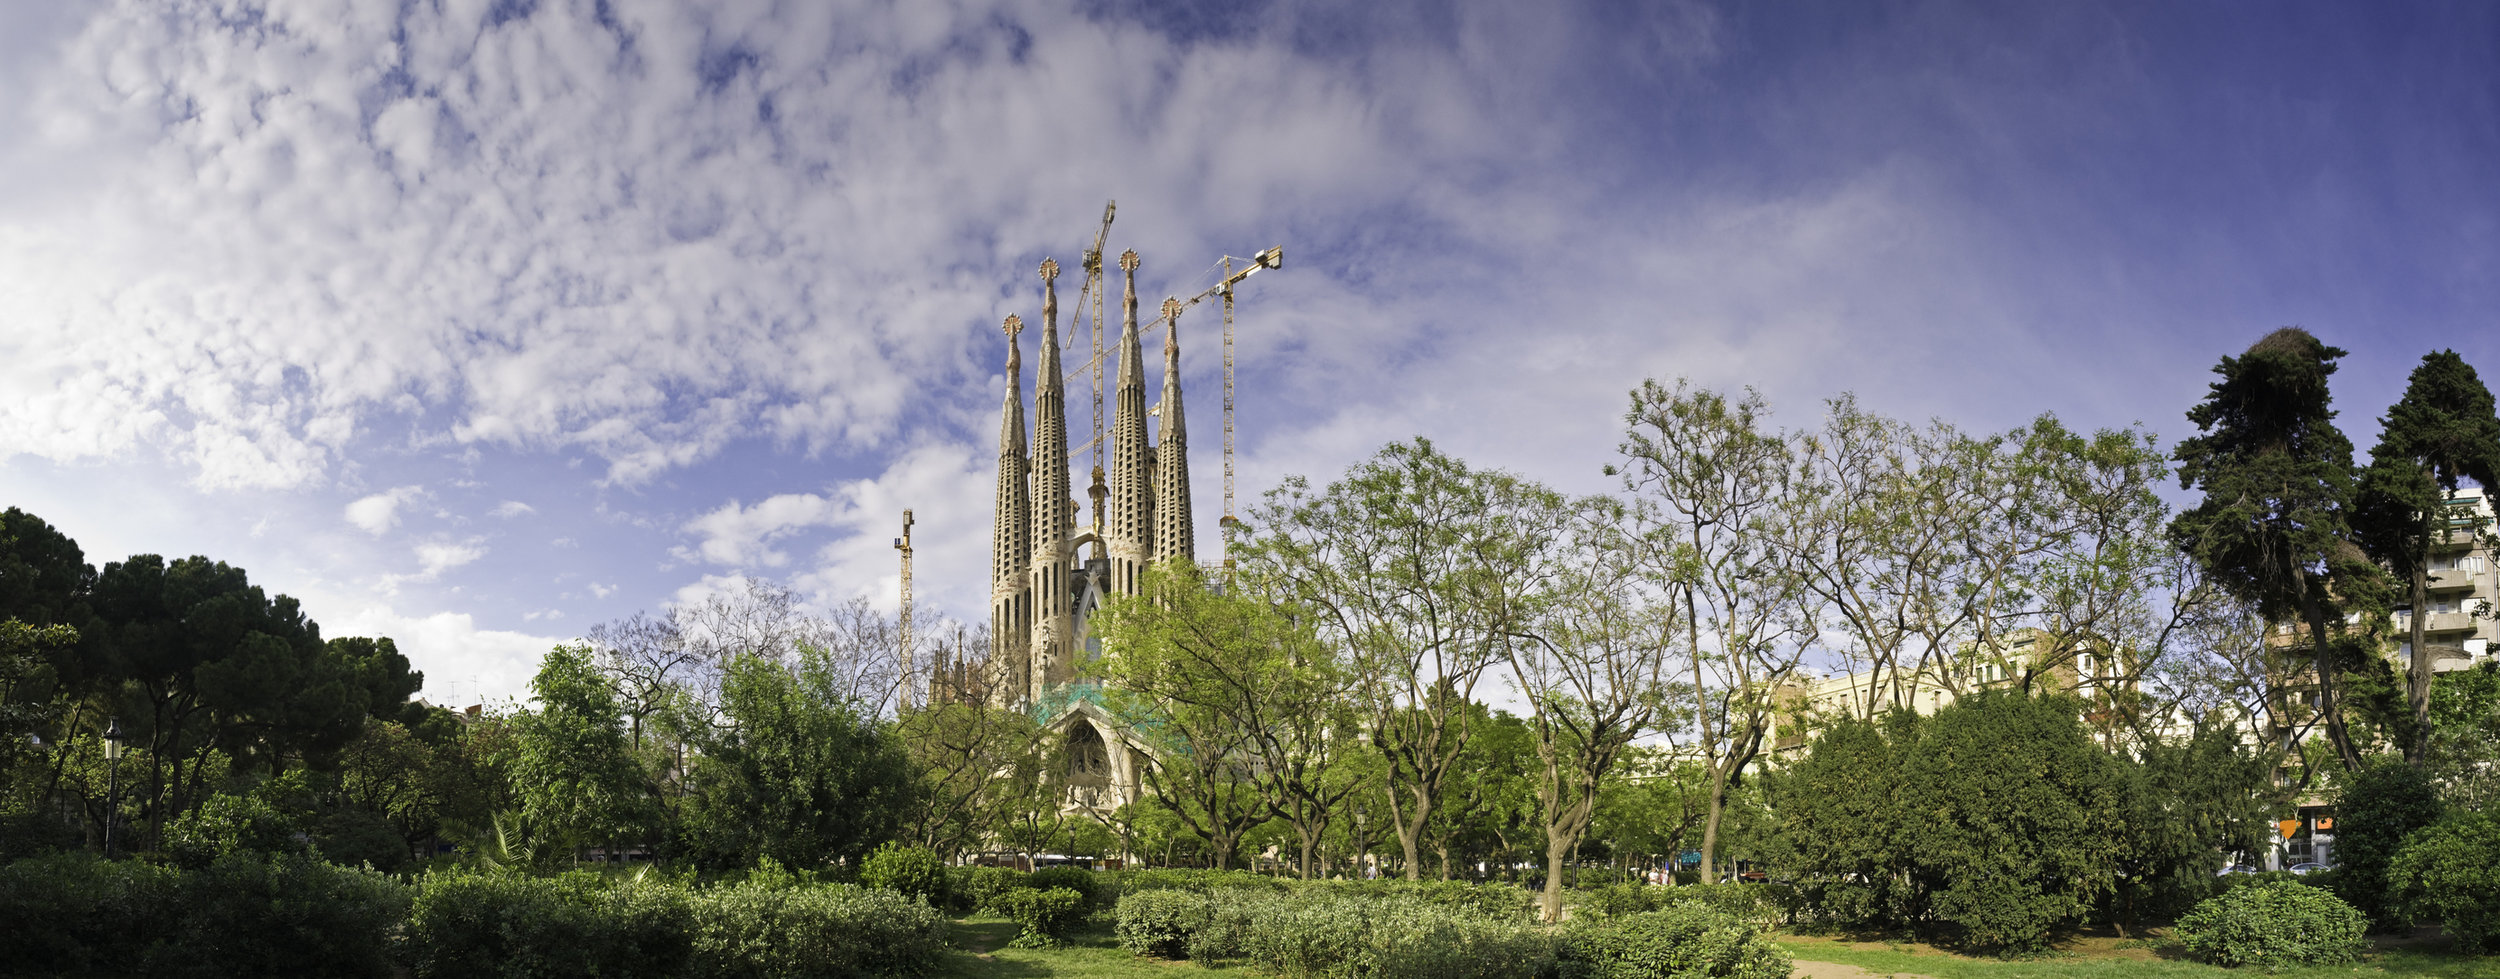 Towers-surrounded-by-trees-in-Sagrada-Familia,-Barcelona-118075422_2768x1085.jpeg